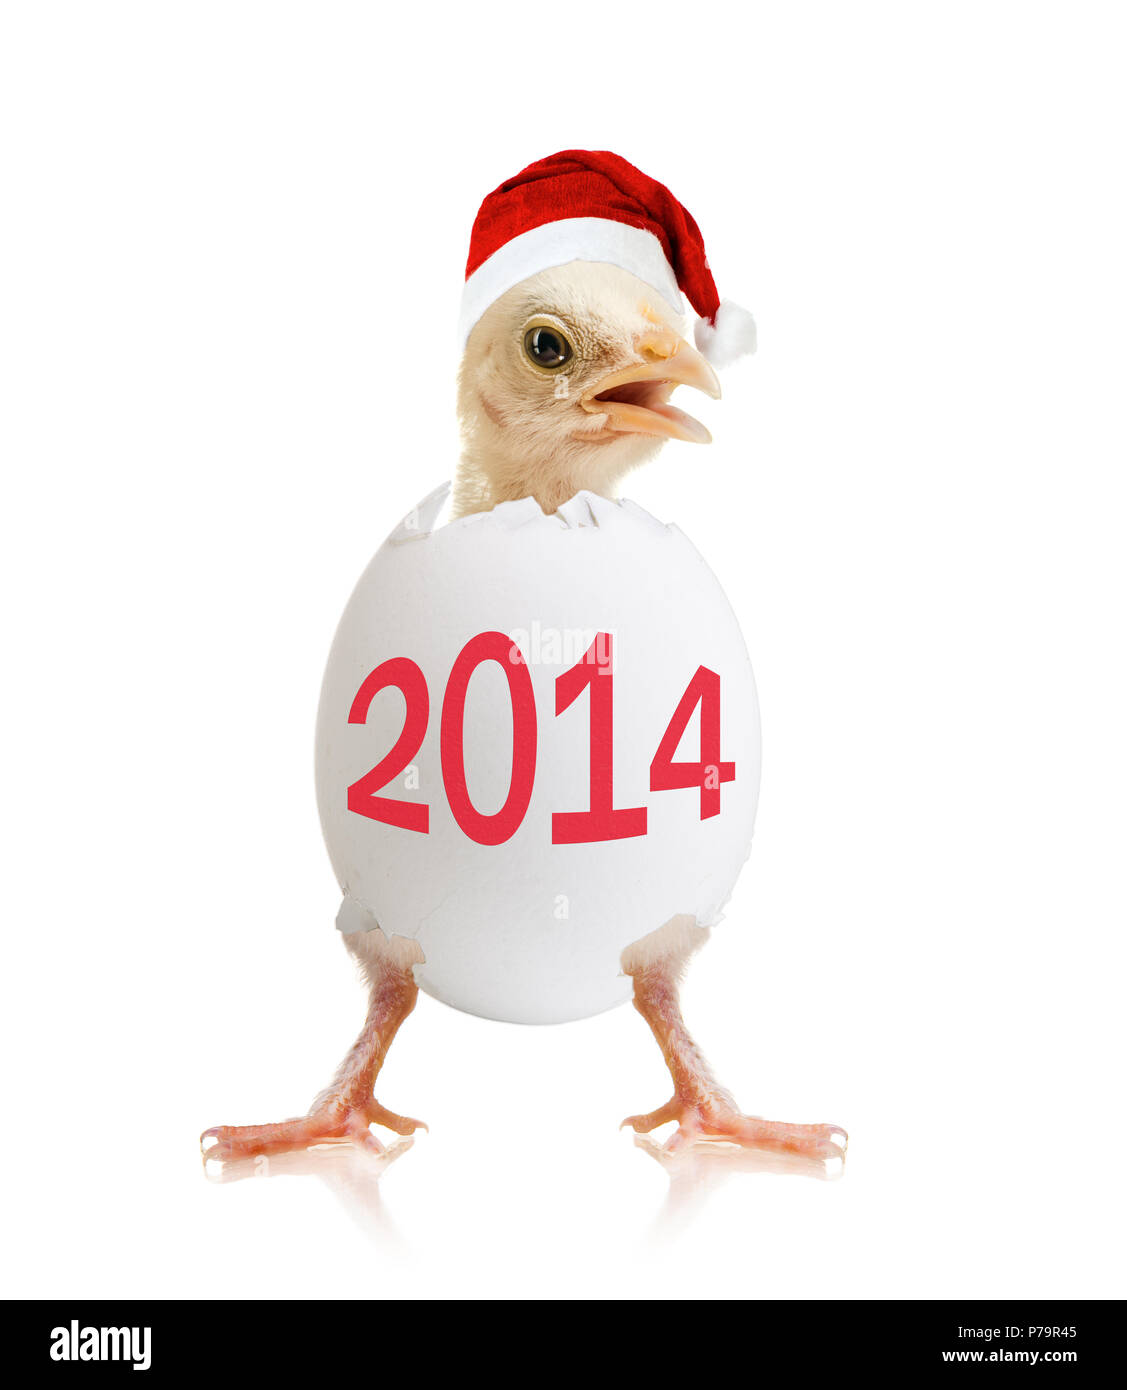 newborn hatch little chick with egg, on white background, isolated, 2014  New Year concept Stock Photo